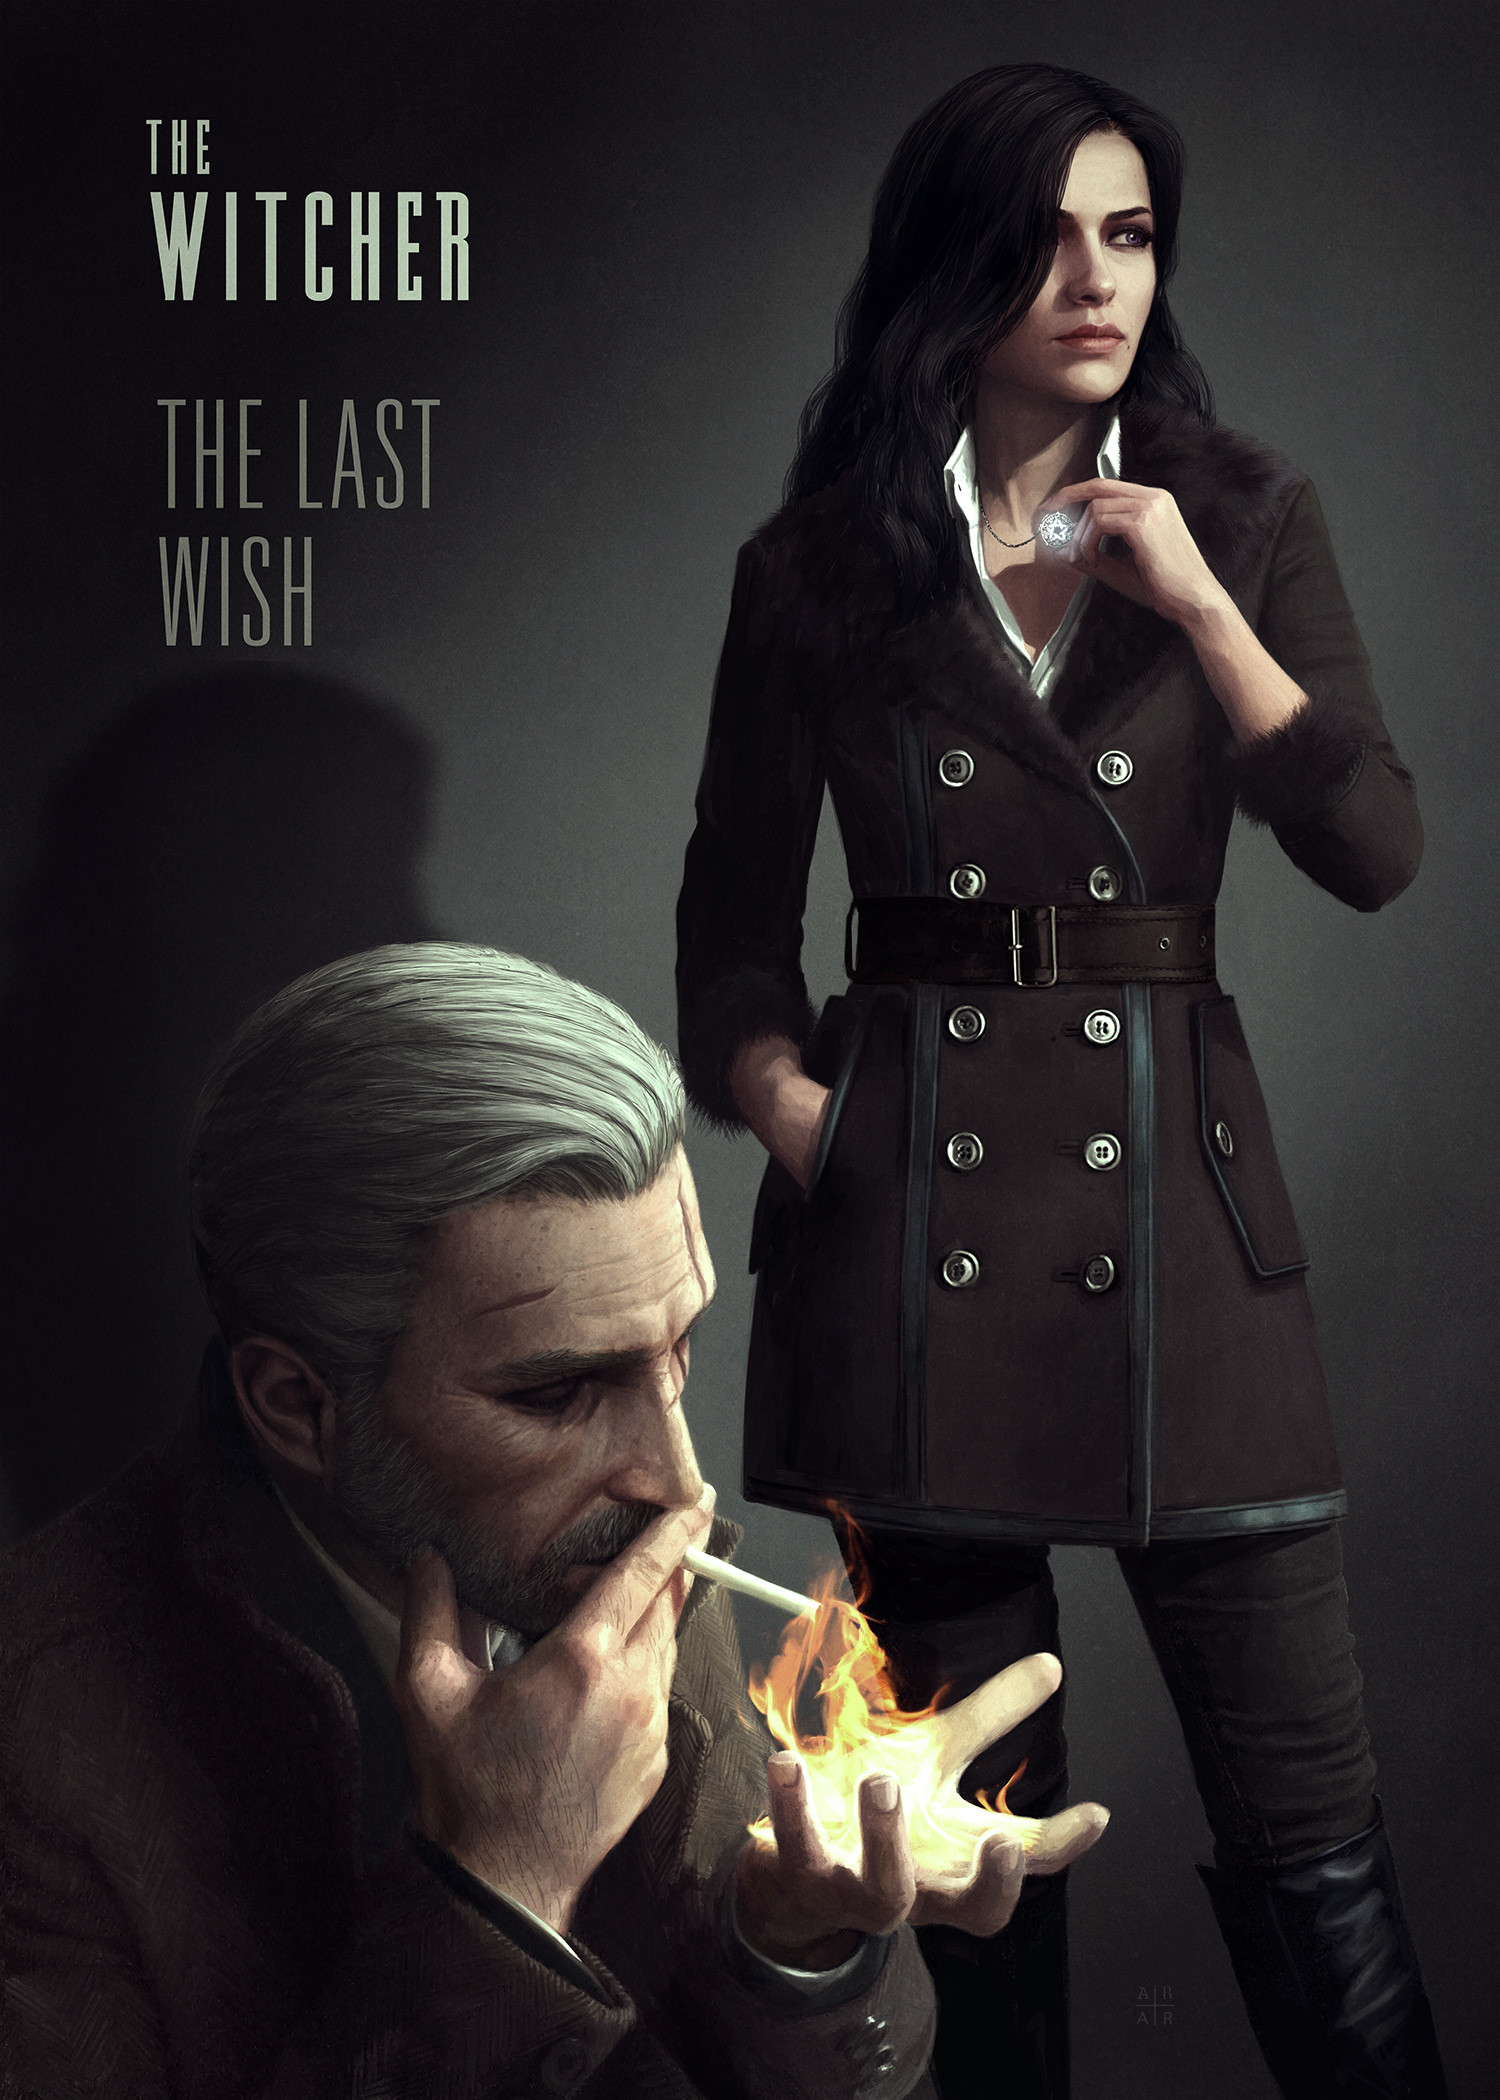 Fine Art: The Witcher 3 And Nintendo Games Are Just Pulp Fiction